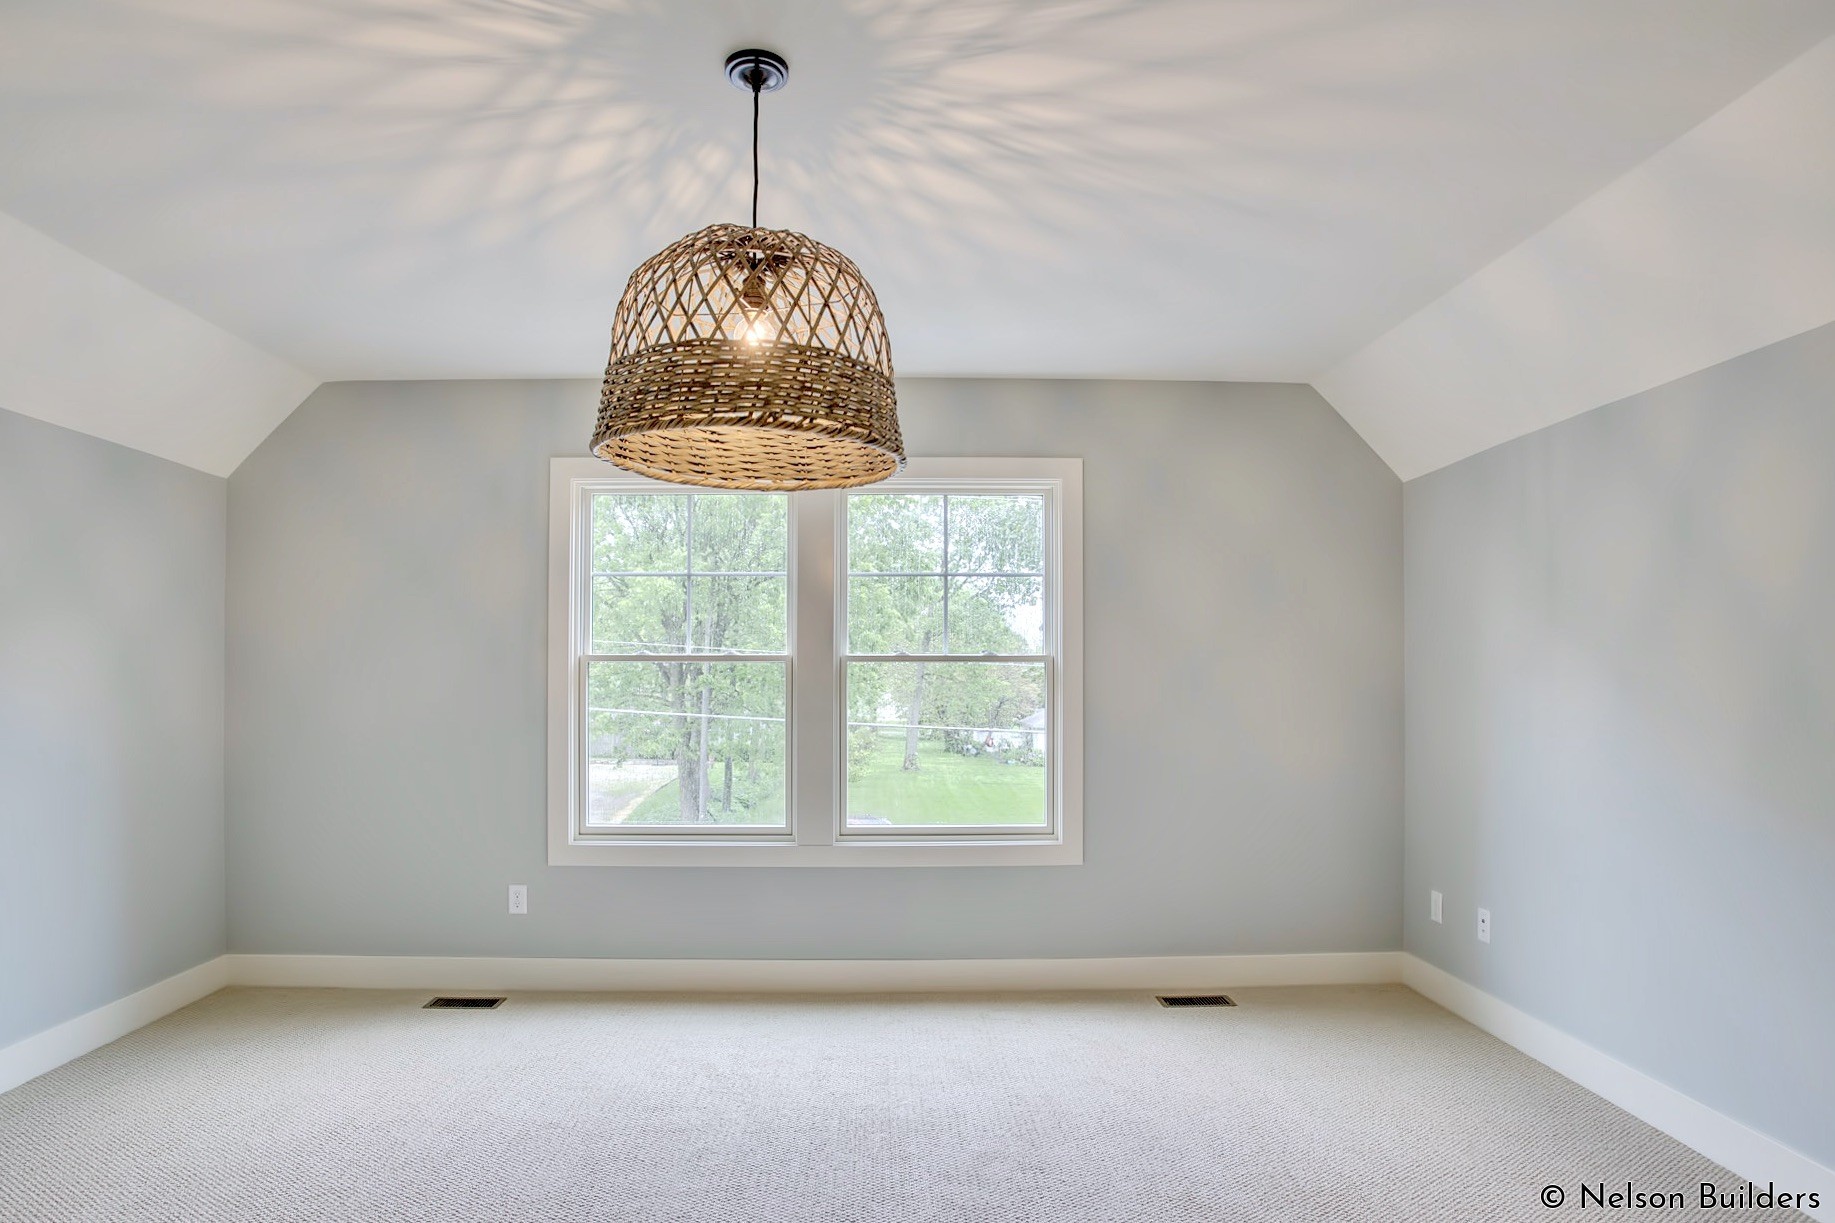 The bonus room is accented with a basket chandelier, for a little touch of character.